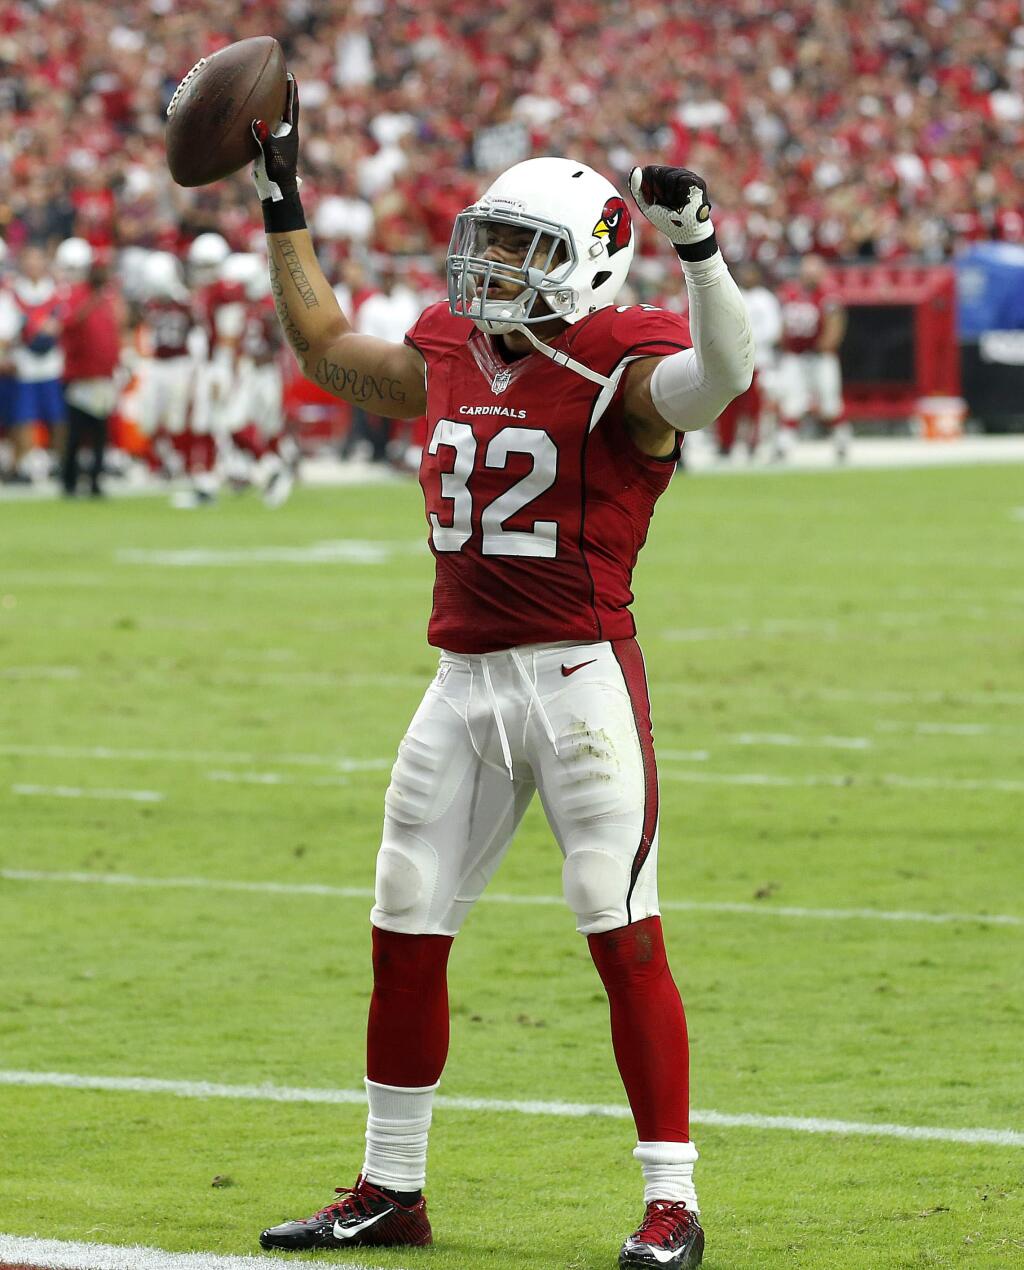 Arizona Cardinals free safety Tyrann Mathieu (32) celebrates his second interception of the game against the San Francisco 49ers during the first half of an NFL football game, Sunday, Sept. 27, 2015, in Glendale, Ariz. (AP Photo/Ross D. Franklin)